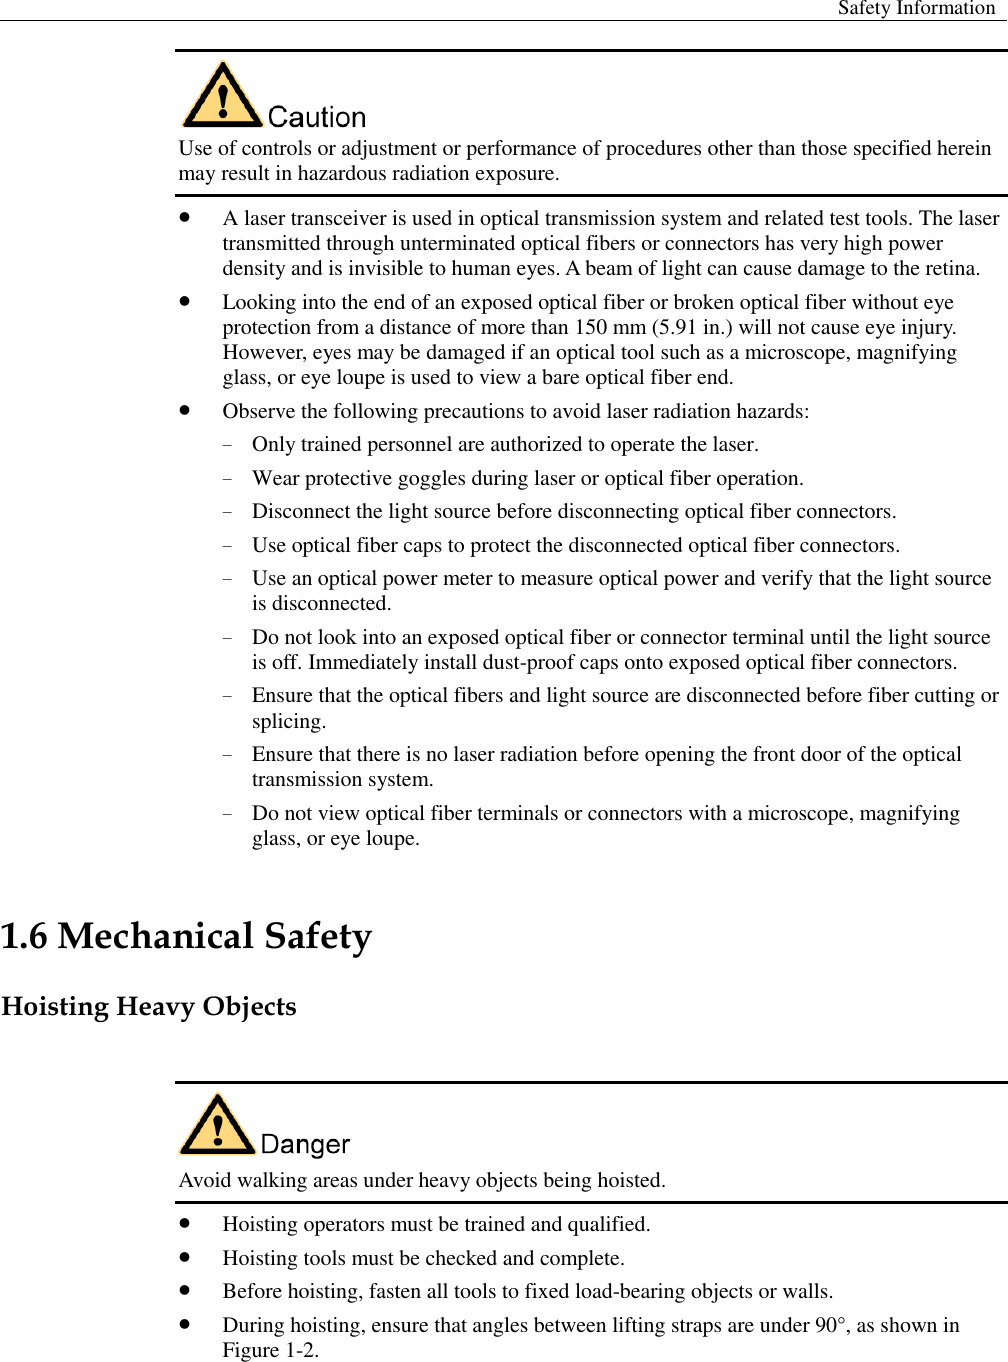  Safety Information   Use of controls or adjustment or performance of procedures other than those specified herein may result in hazardous radiation exposure.    A laser transceiver is used in optical transmission system and related test tools. The laser transmitted through unterminated optical fibers or connectors has very high power density and is invisible to human eyes. A beam of light can cause damage to the retina.  Looking into the end of an exposed optical fiber or broken optical fiber without eye protection from a distance of more than 150 mm (5.91 in.) will not cause eye injury. However, eyes may be damaged if an optical tool such as a microscope, magnifying glass, or eye loupe is used to view a bare optical fiber end.    Observe the following precautions to avoid laser radiation hazards:   − Only trained personnel are authorized to operate the laser.   − Wear protective goggles during laser or optical fiber operation.   − Disconnect the light source before disconnecting optical fiber connectors.   − Use optical fiber caps to protect the disconnected optical fiber connectors.   − Use an optical power meter to measure optical power and verify that the light source is disconnected.   − Do not look into an exposed optical fiber or connector terminal until the light source is off. Immediately install dust-proof caps onto exposed optical fiber connectors.   − Ensure that the optical fibers and light source are disconnected before fiber cutting or splicing. − Ensure that there is no laser radiation before opening the front door of the optical transmission system.   − Do not view optical fiber terminals or connectors with a microscope, magnifying glass, or eye loupe. 1.6 Mechanical Safety Hoisting Heavy Objects   Avoid walking areas under heavy objects being hoisted.    Hoisting operators must be trained and qualified.  Hoisting tools must be checked and complete.    Before hoisting, fasten all tools to fixed load-bearing objects or walls.    During hoisting, ensure that angles between lifting straps are under 90°, as shown in Figure 1-2.   